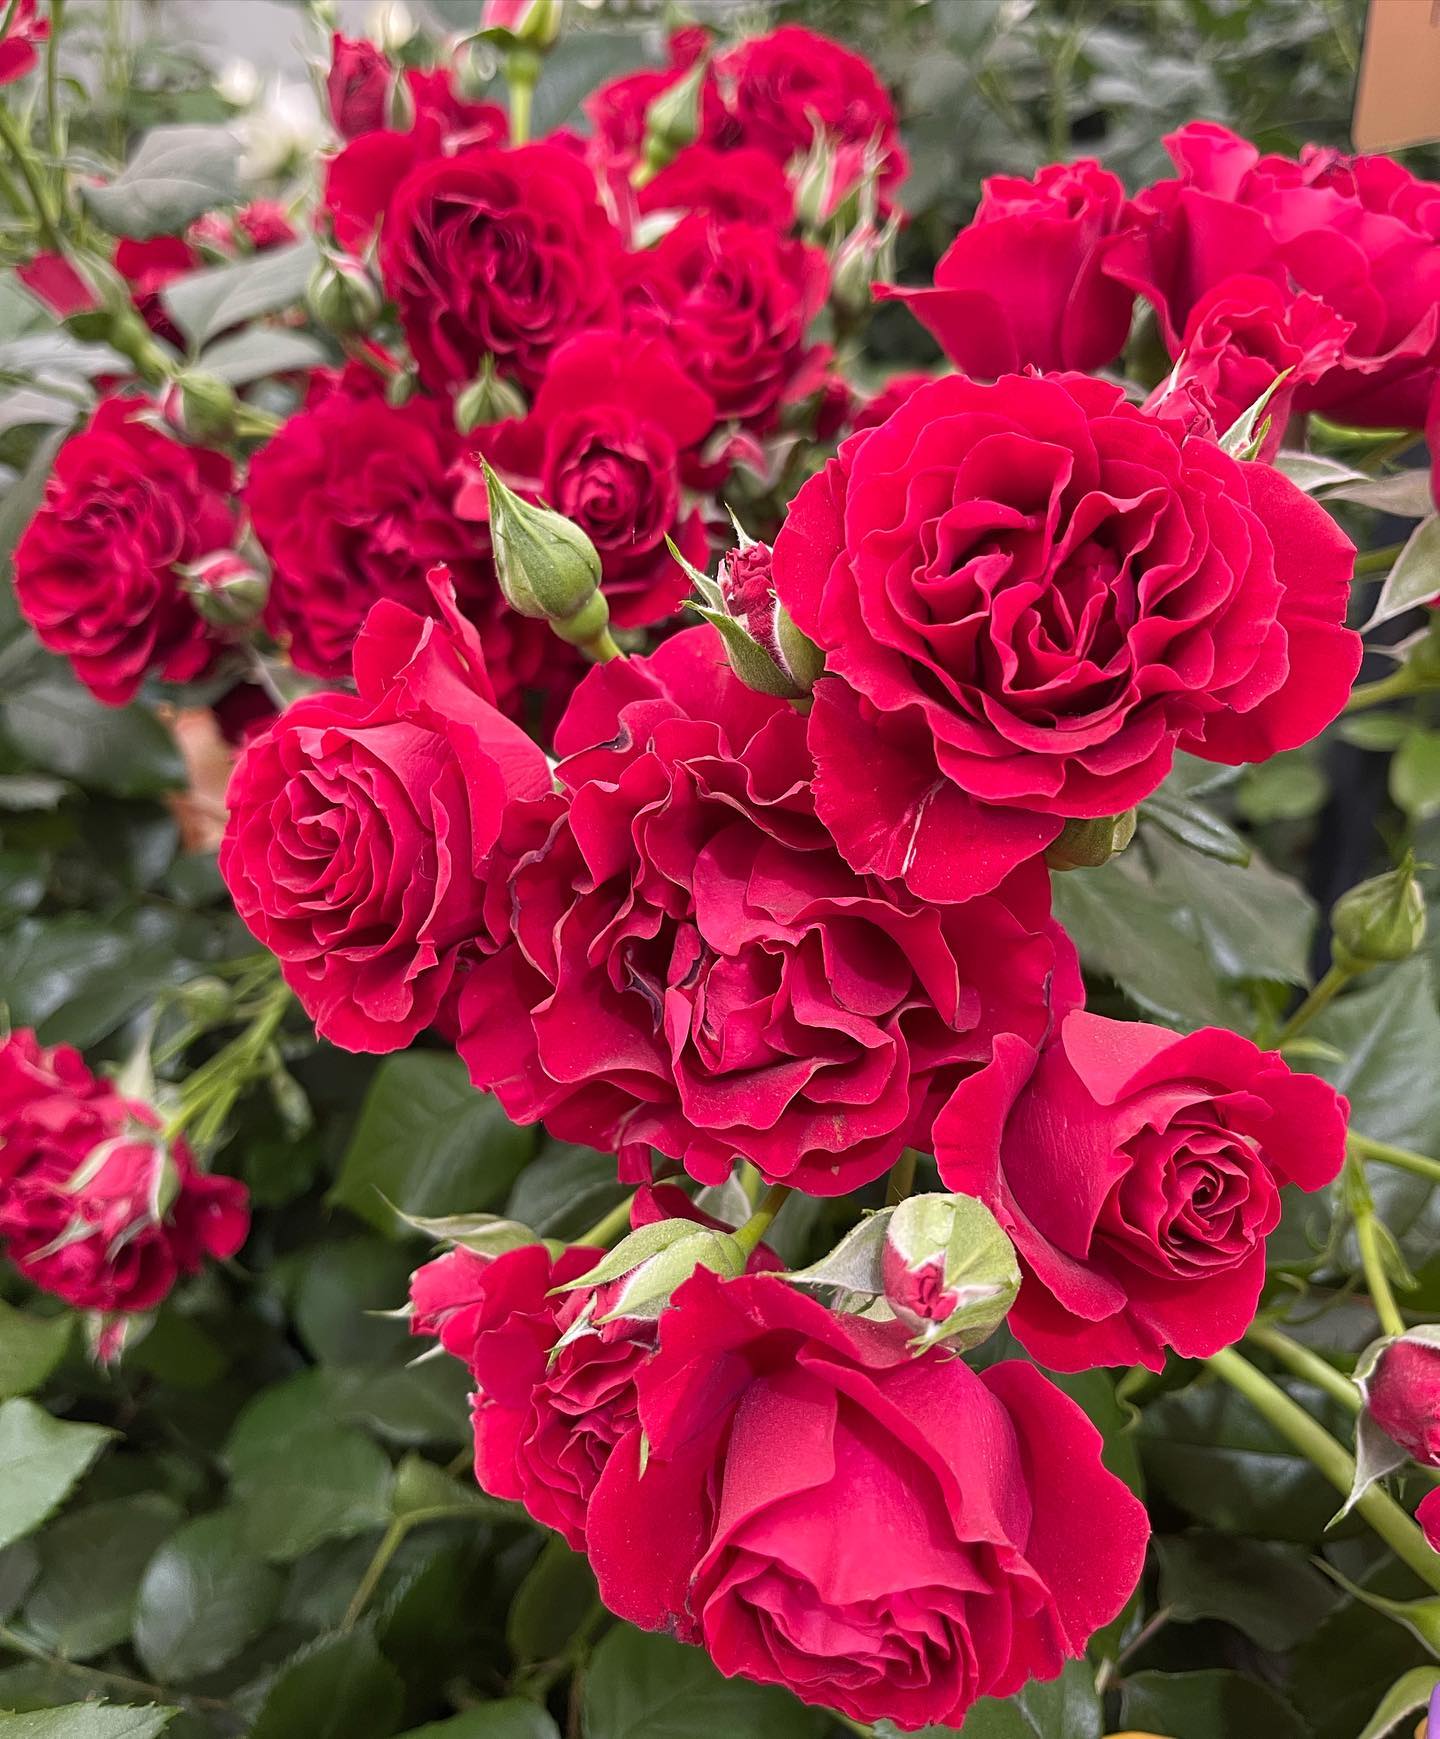 Month by Month guide to caring for your roses - The Harkness Rose Company